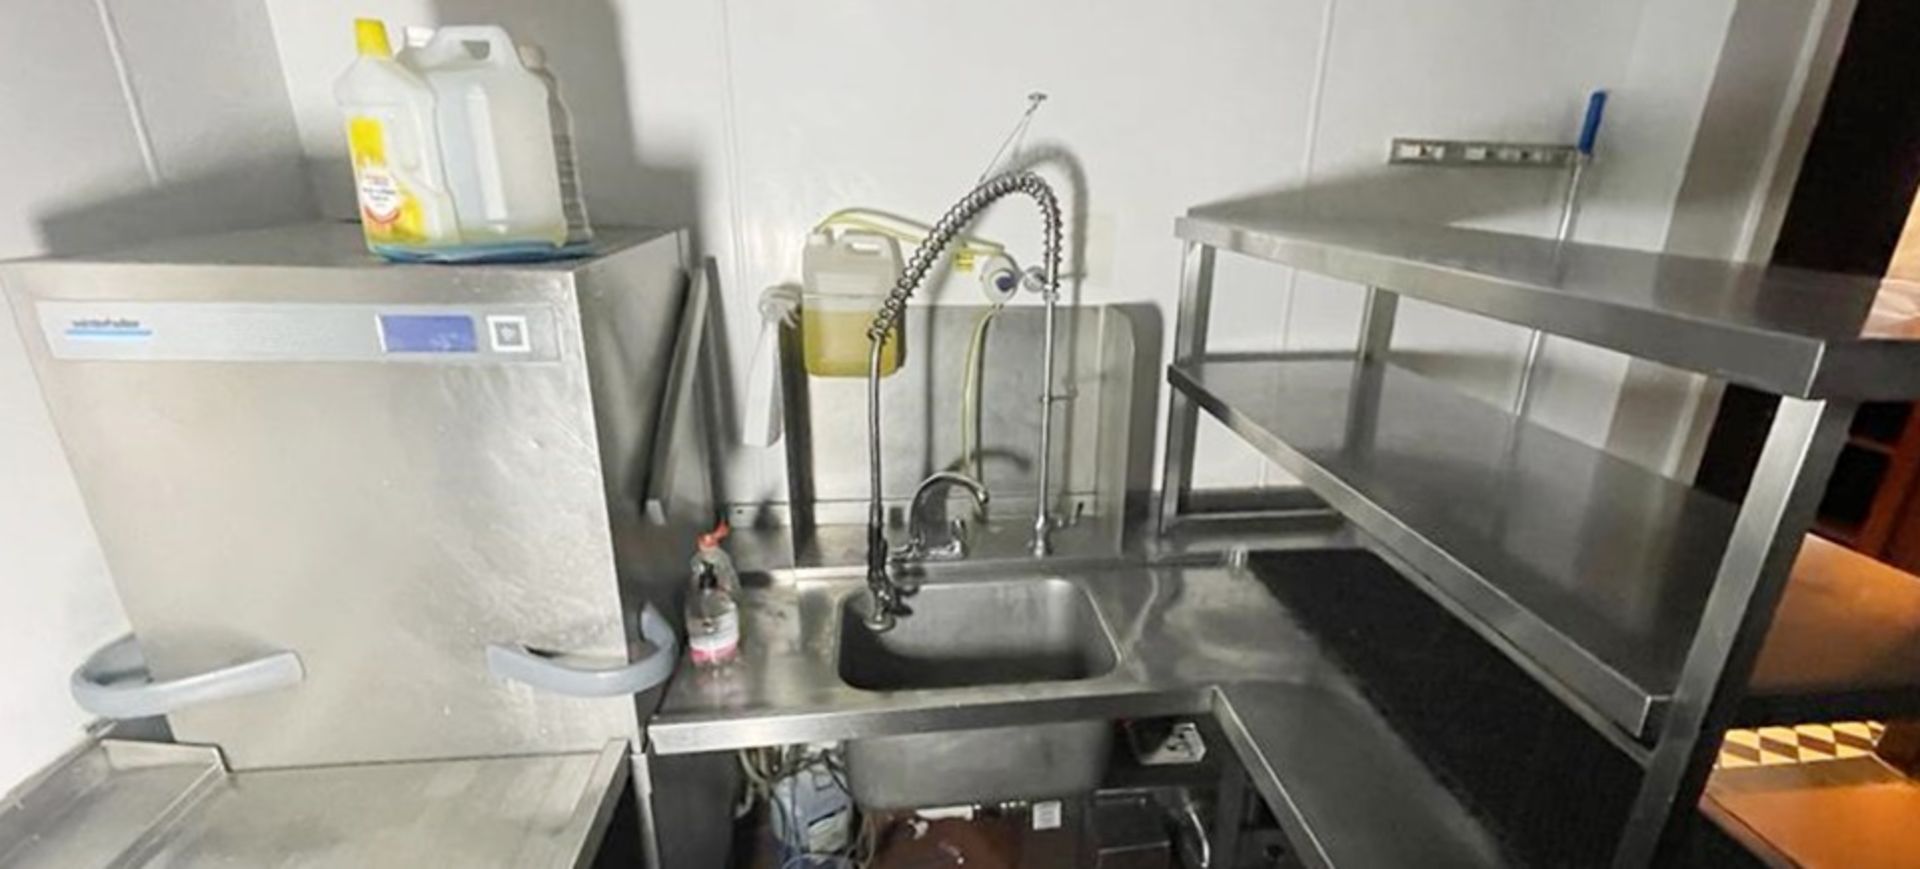 1 x Winterhalter PT-M Passthrough Dishwasher With Inlet and Outlet Table With Wash Basin and Spray - Image 9 of 15